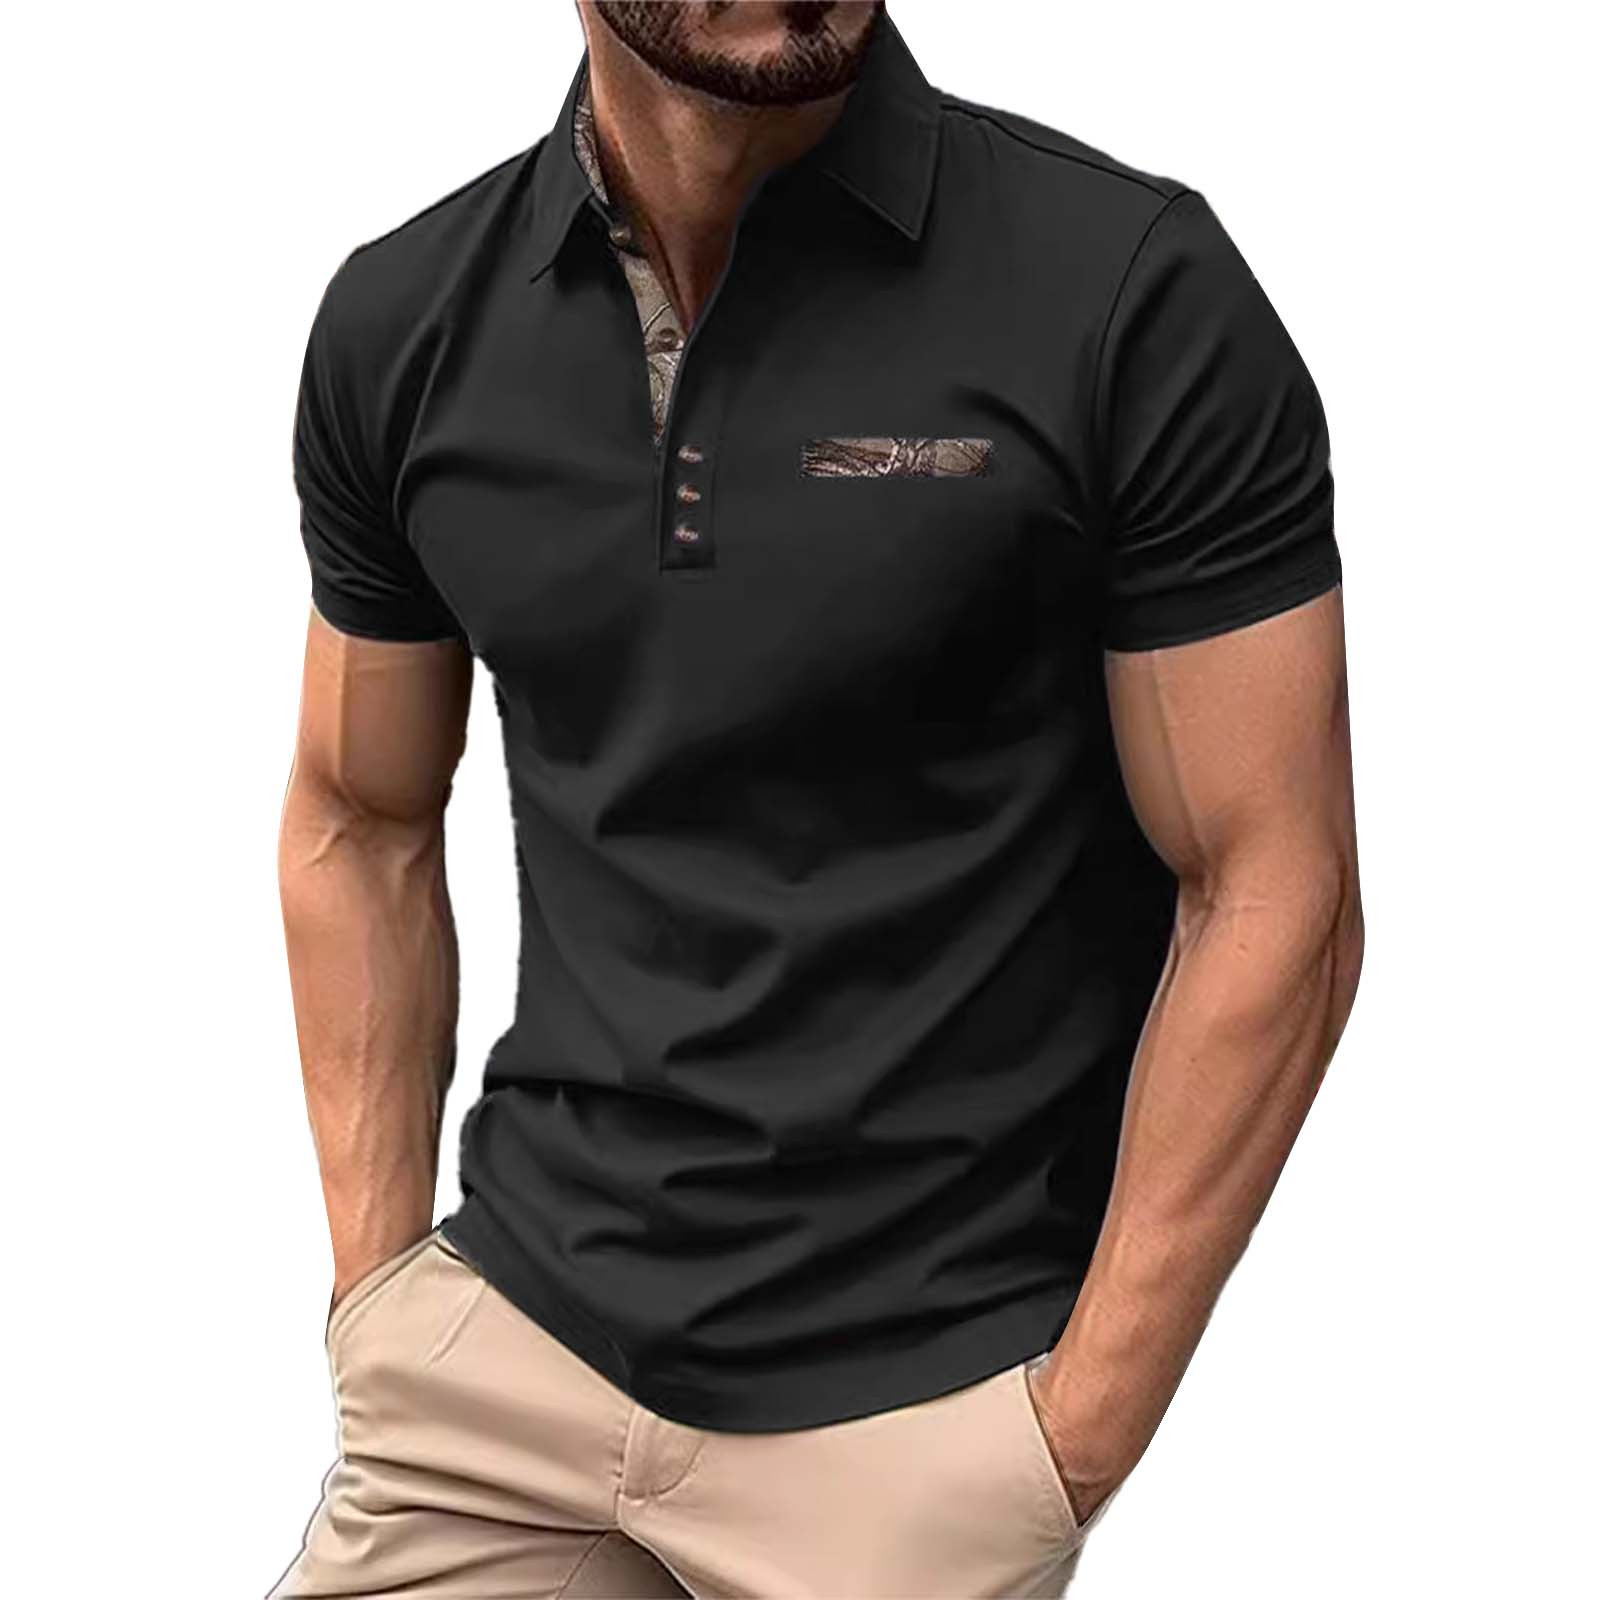 GLVSZ Golf Shirts for Men Quick Dry Short Sleeve Casual Performance ...